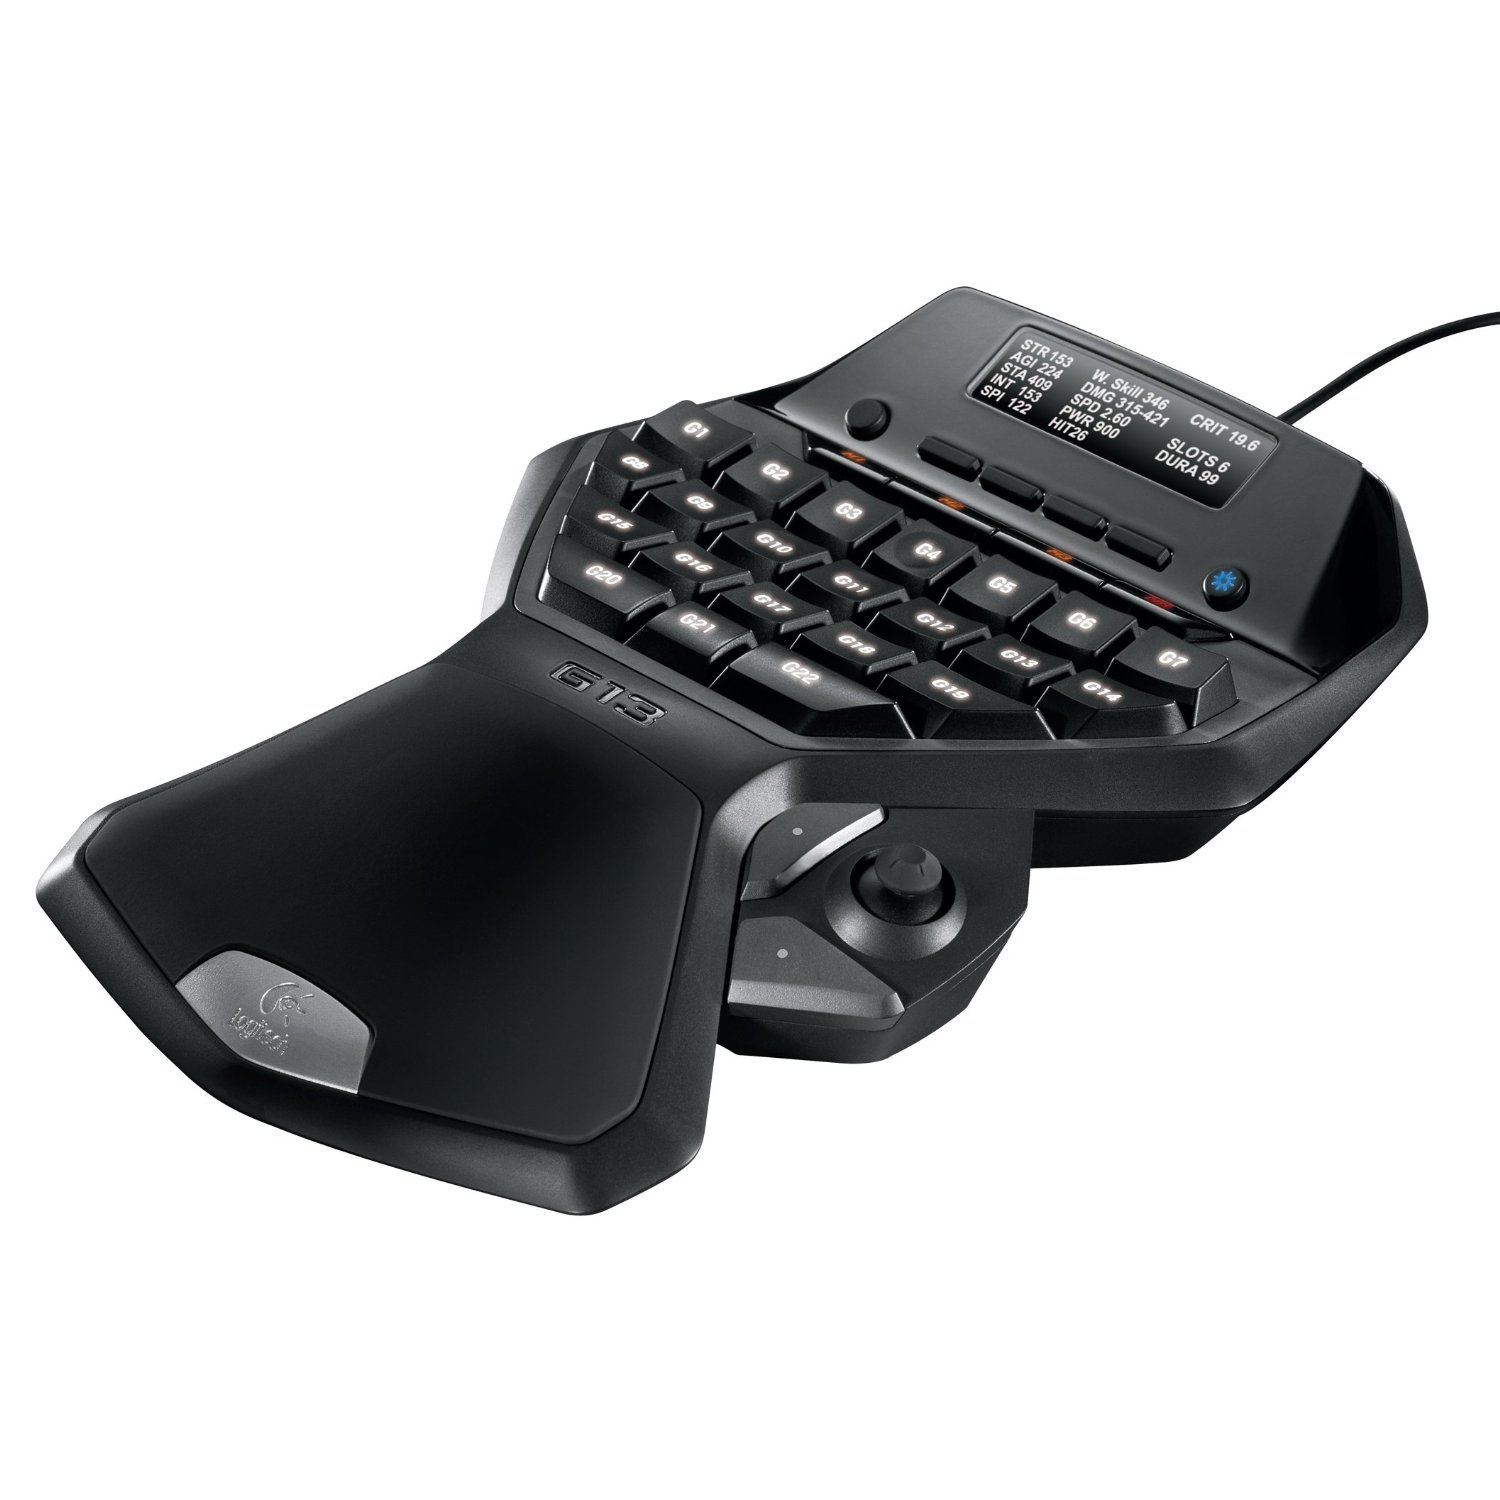 http://thetechjournal.com/wp-content/uploads/images/1108/1312882591-logitech-g13-programmable-gameboard-with-lcd-display-9.jpg